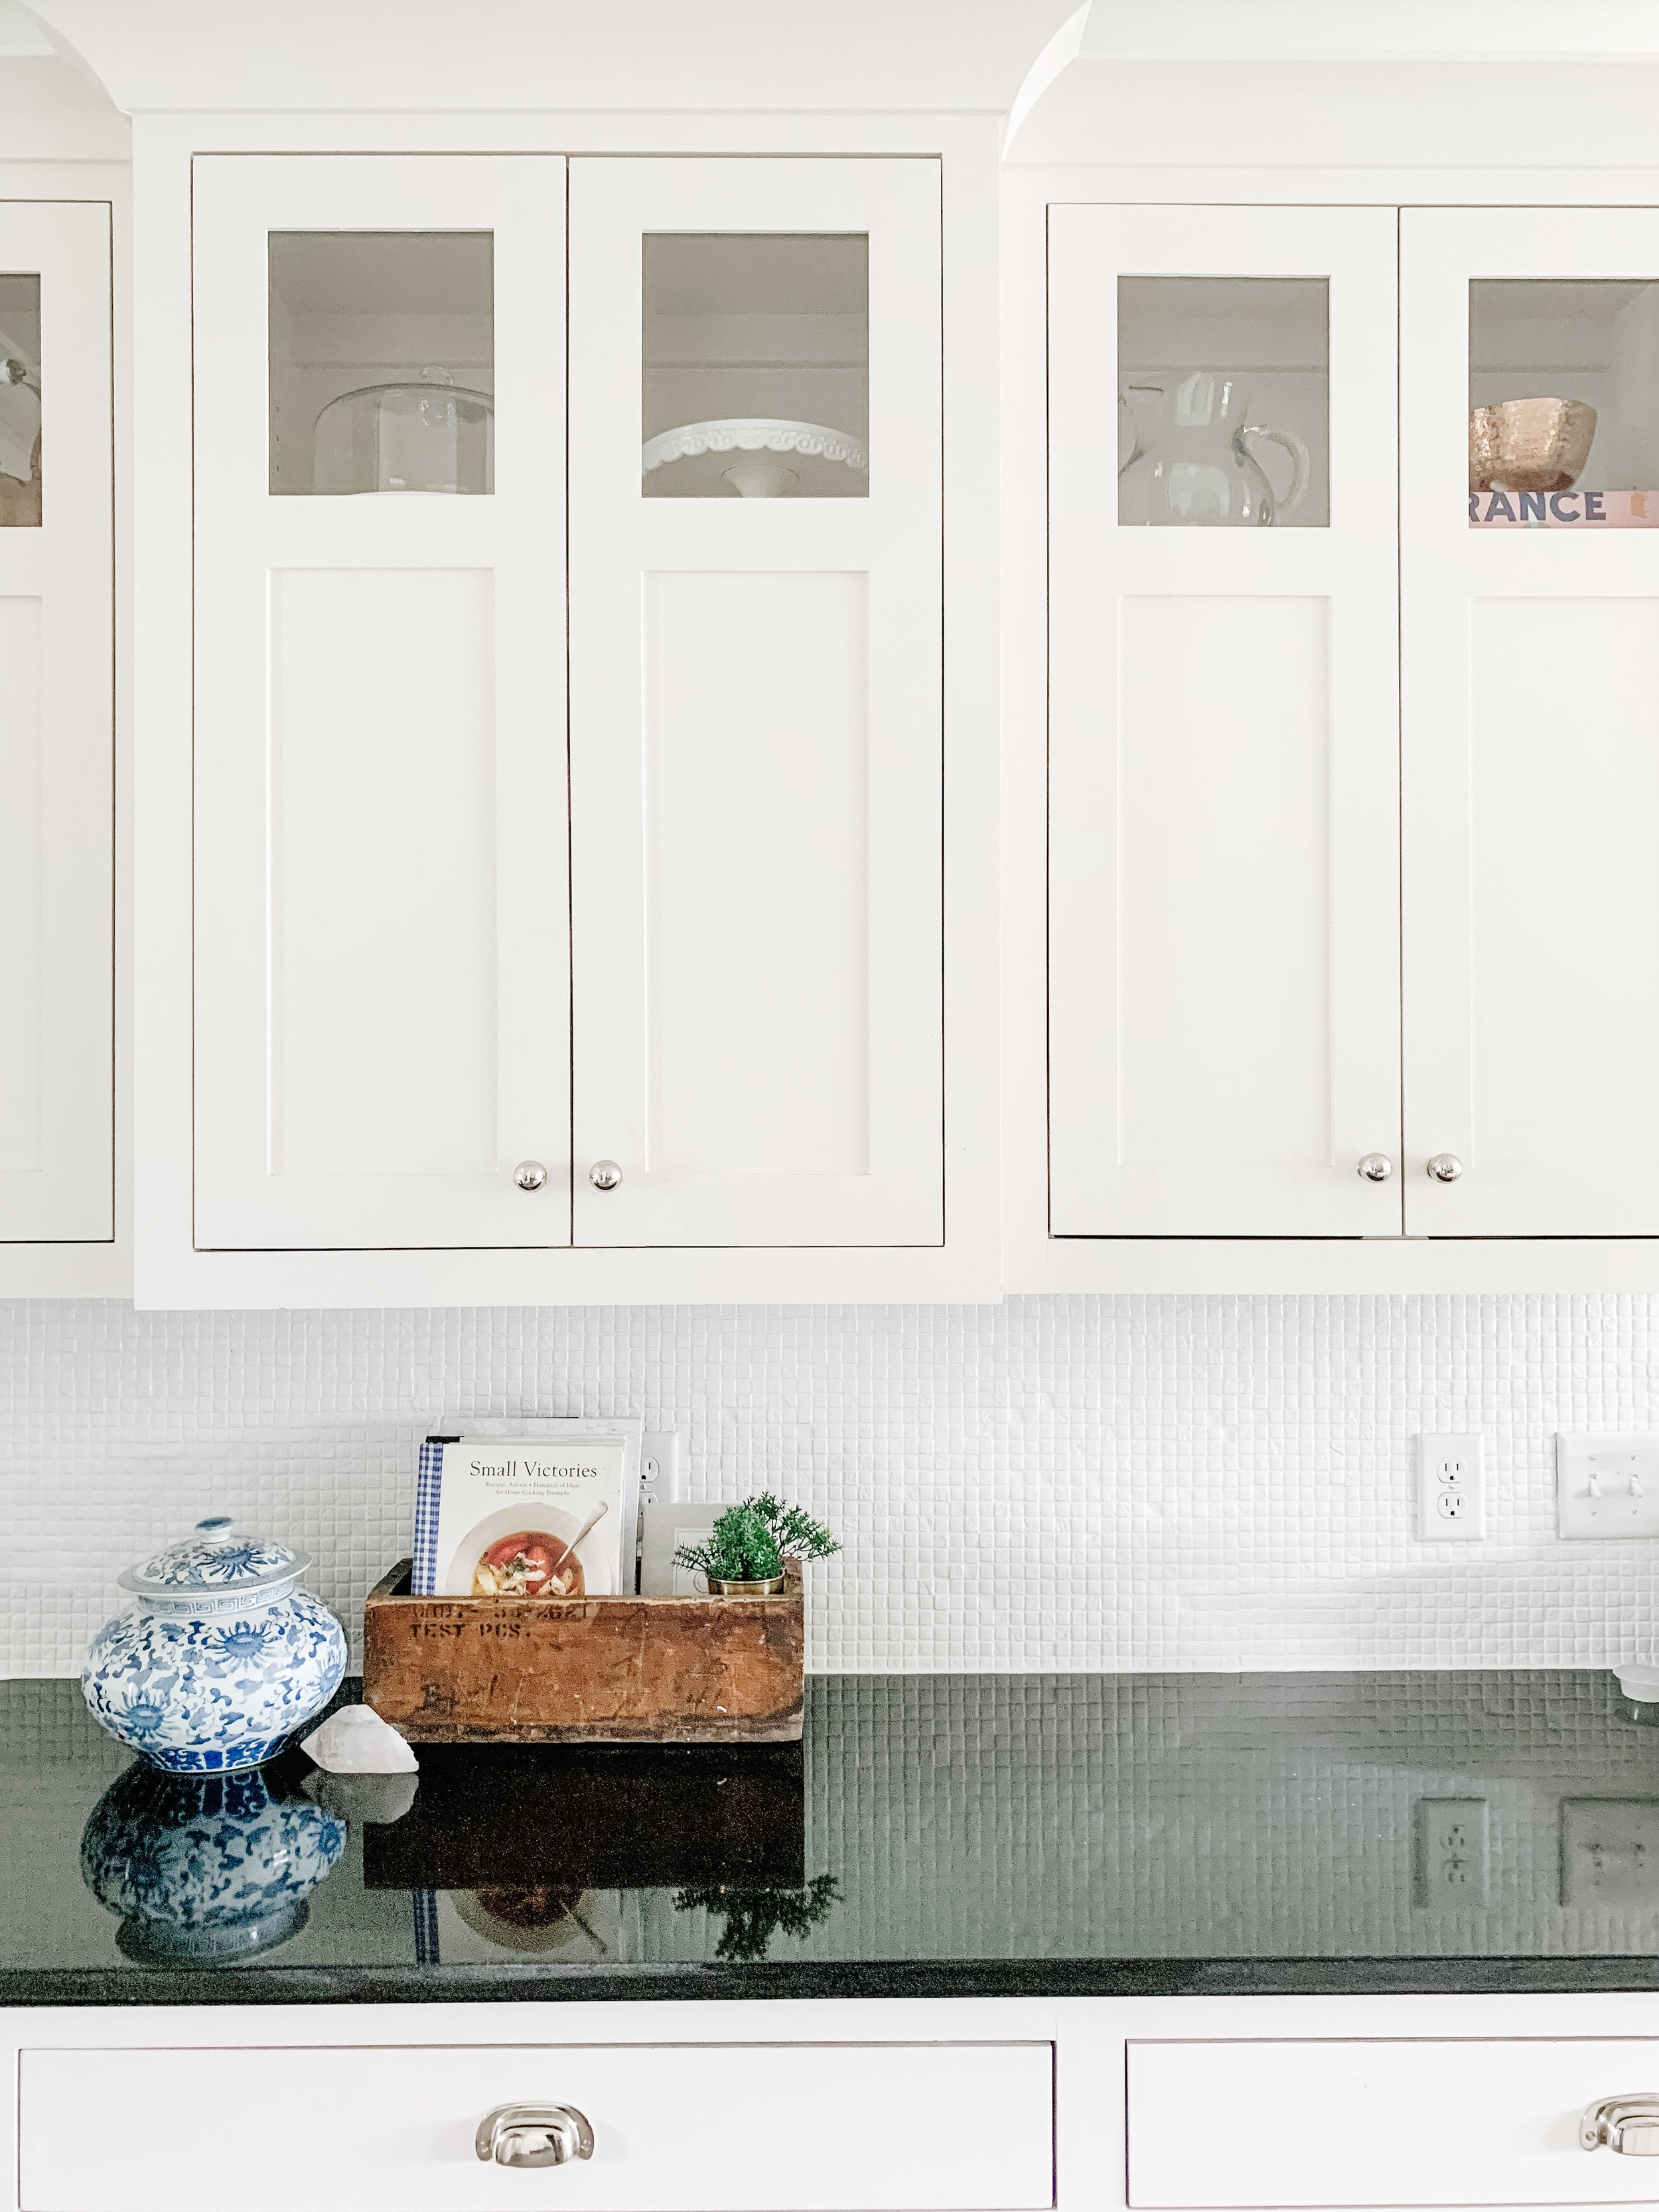 Tiny Bits Of Happiness, Are Glass Tile Backsplashes Out Of Style